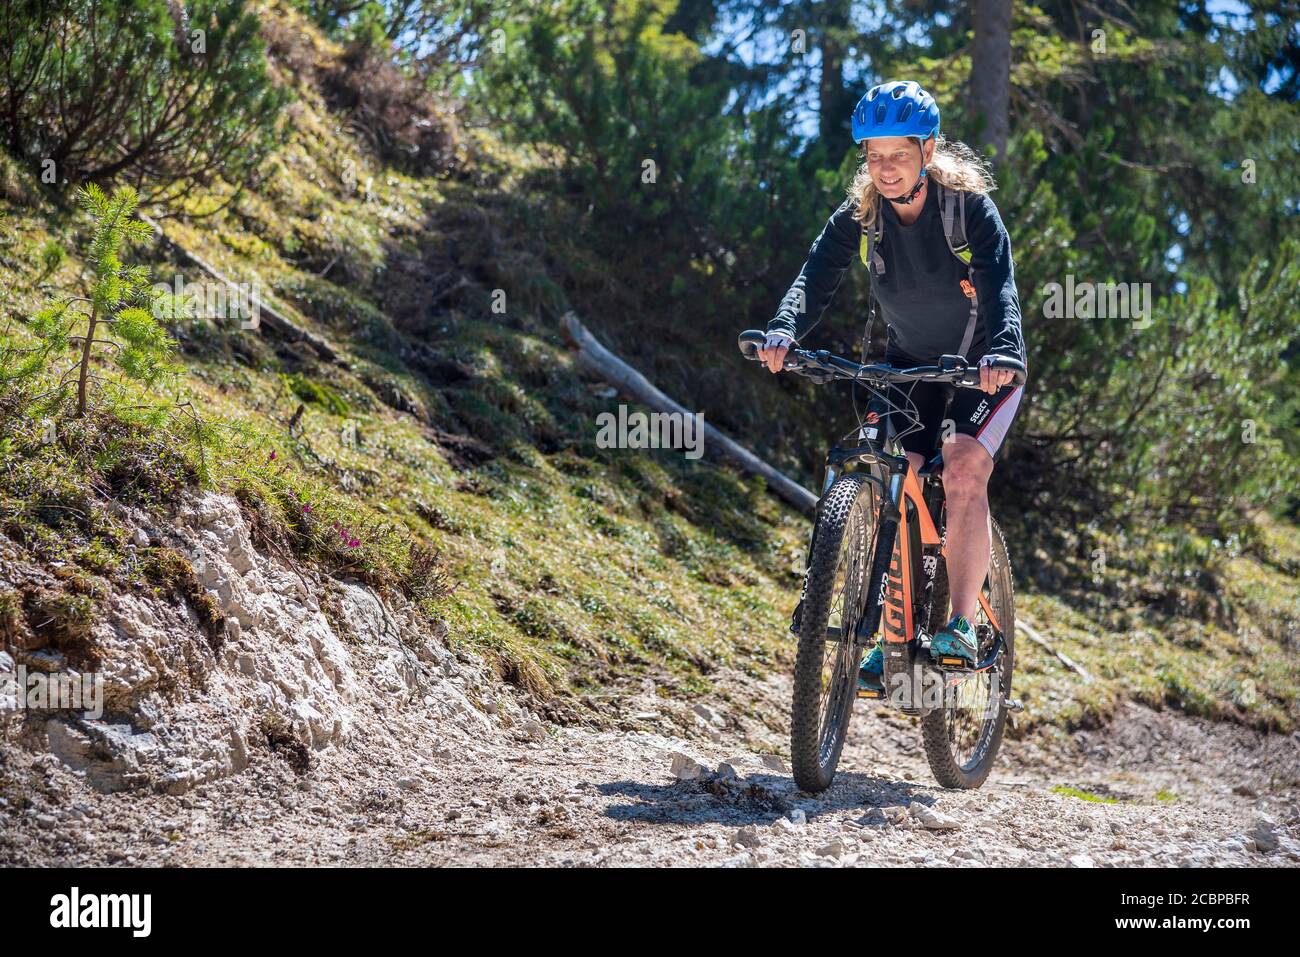 Female mountain biker rides with eMTB on a cart track uphill in the mountain forest, Rofan Mountains, Steinberg am Rofan, Tyrol, Austria Stock Photo